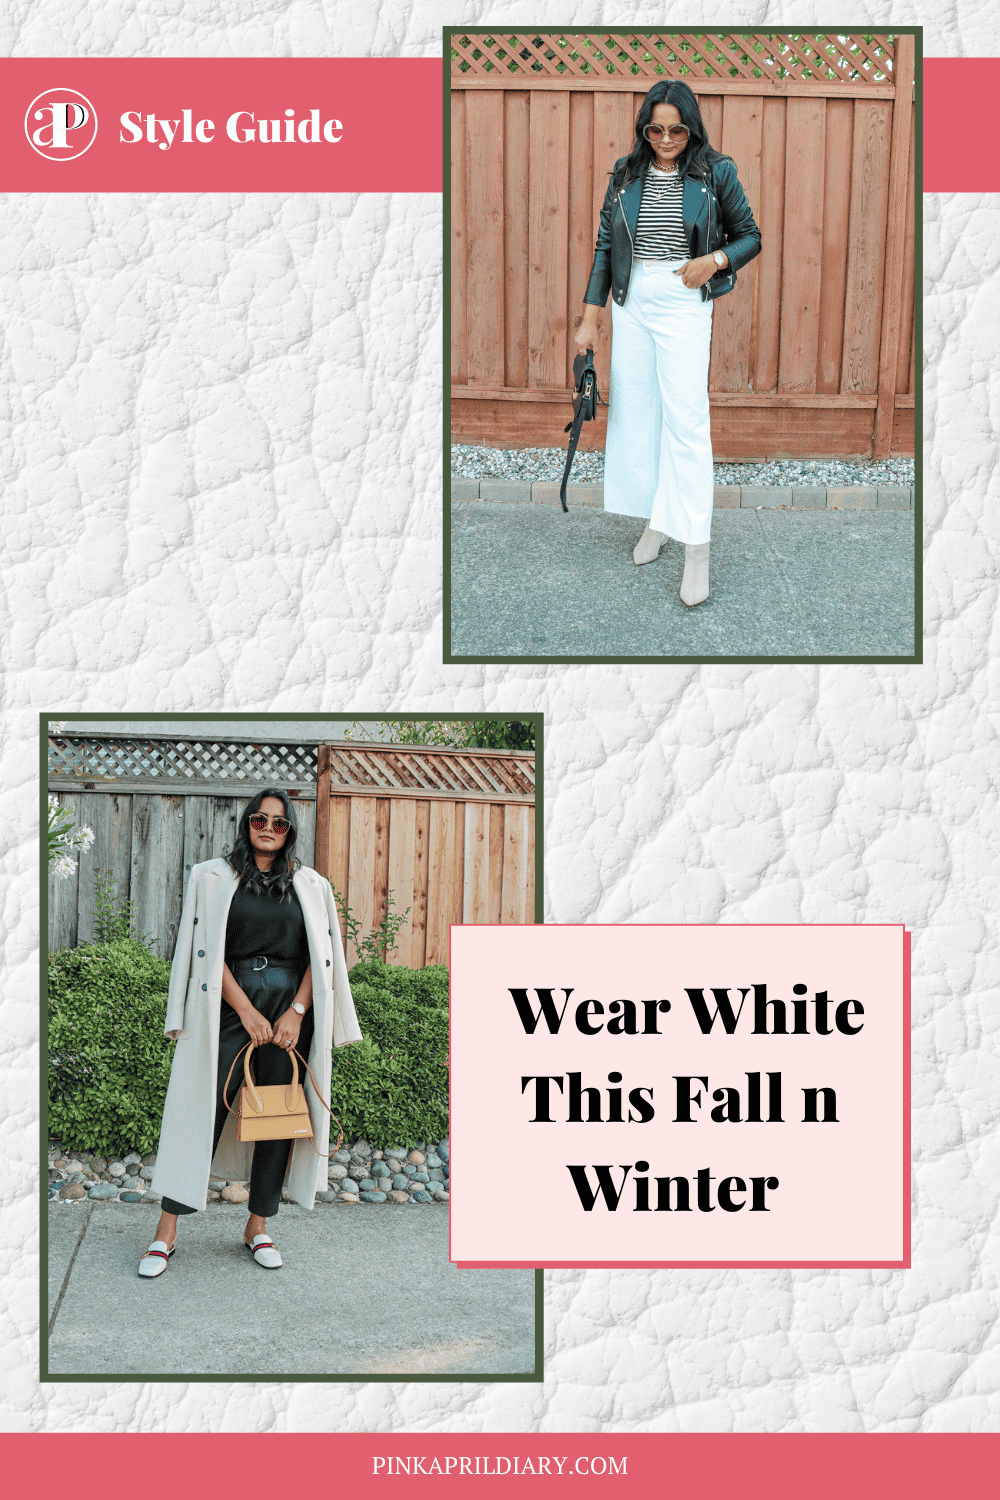 This is How You Can Wear White in Fall & Winter